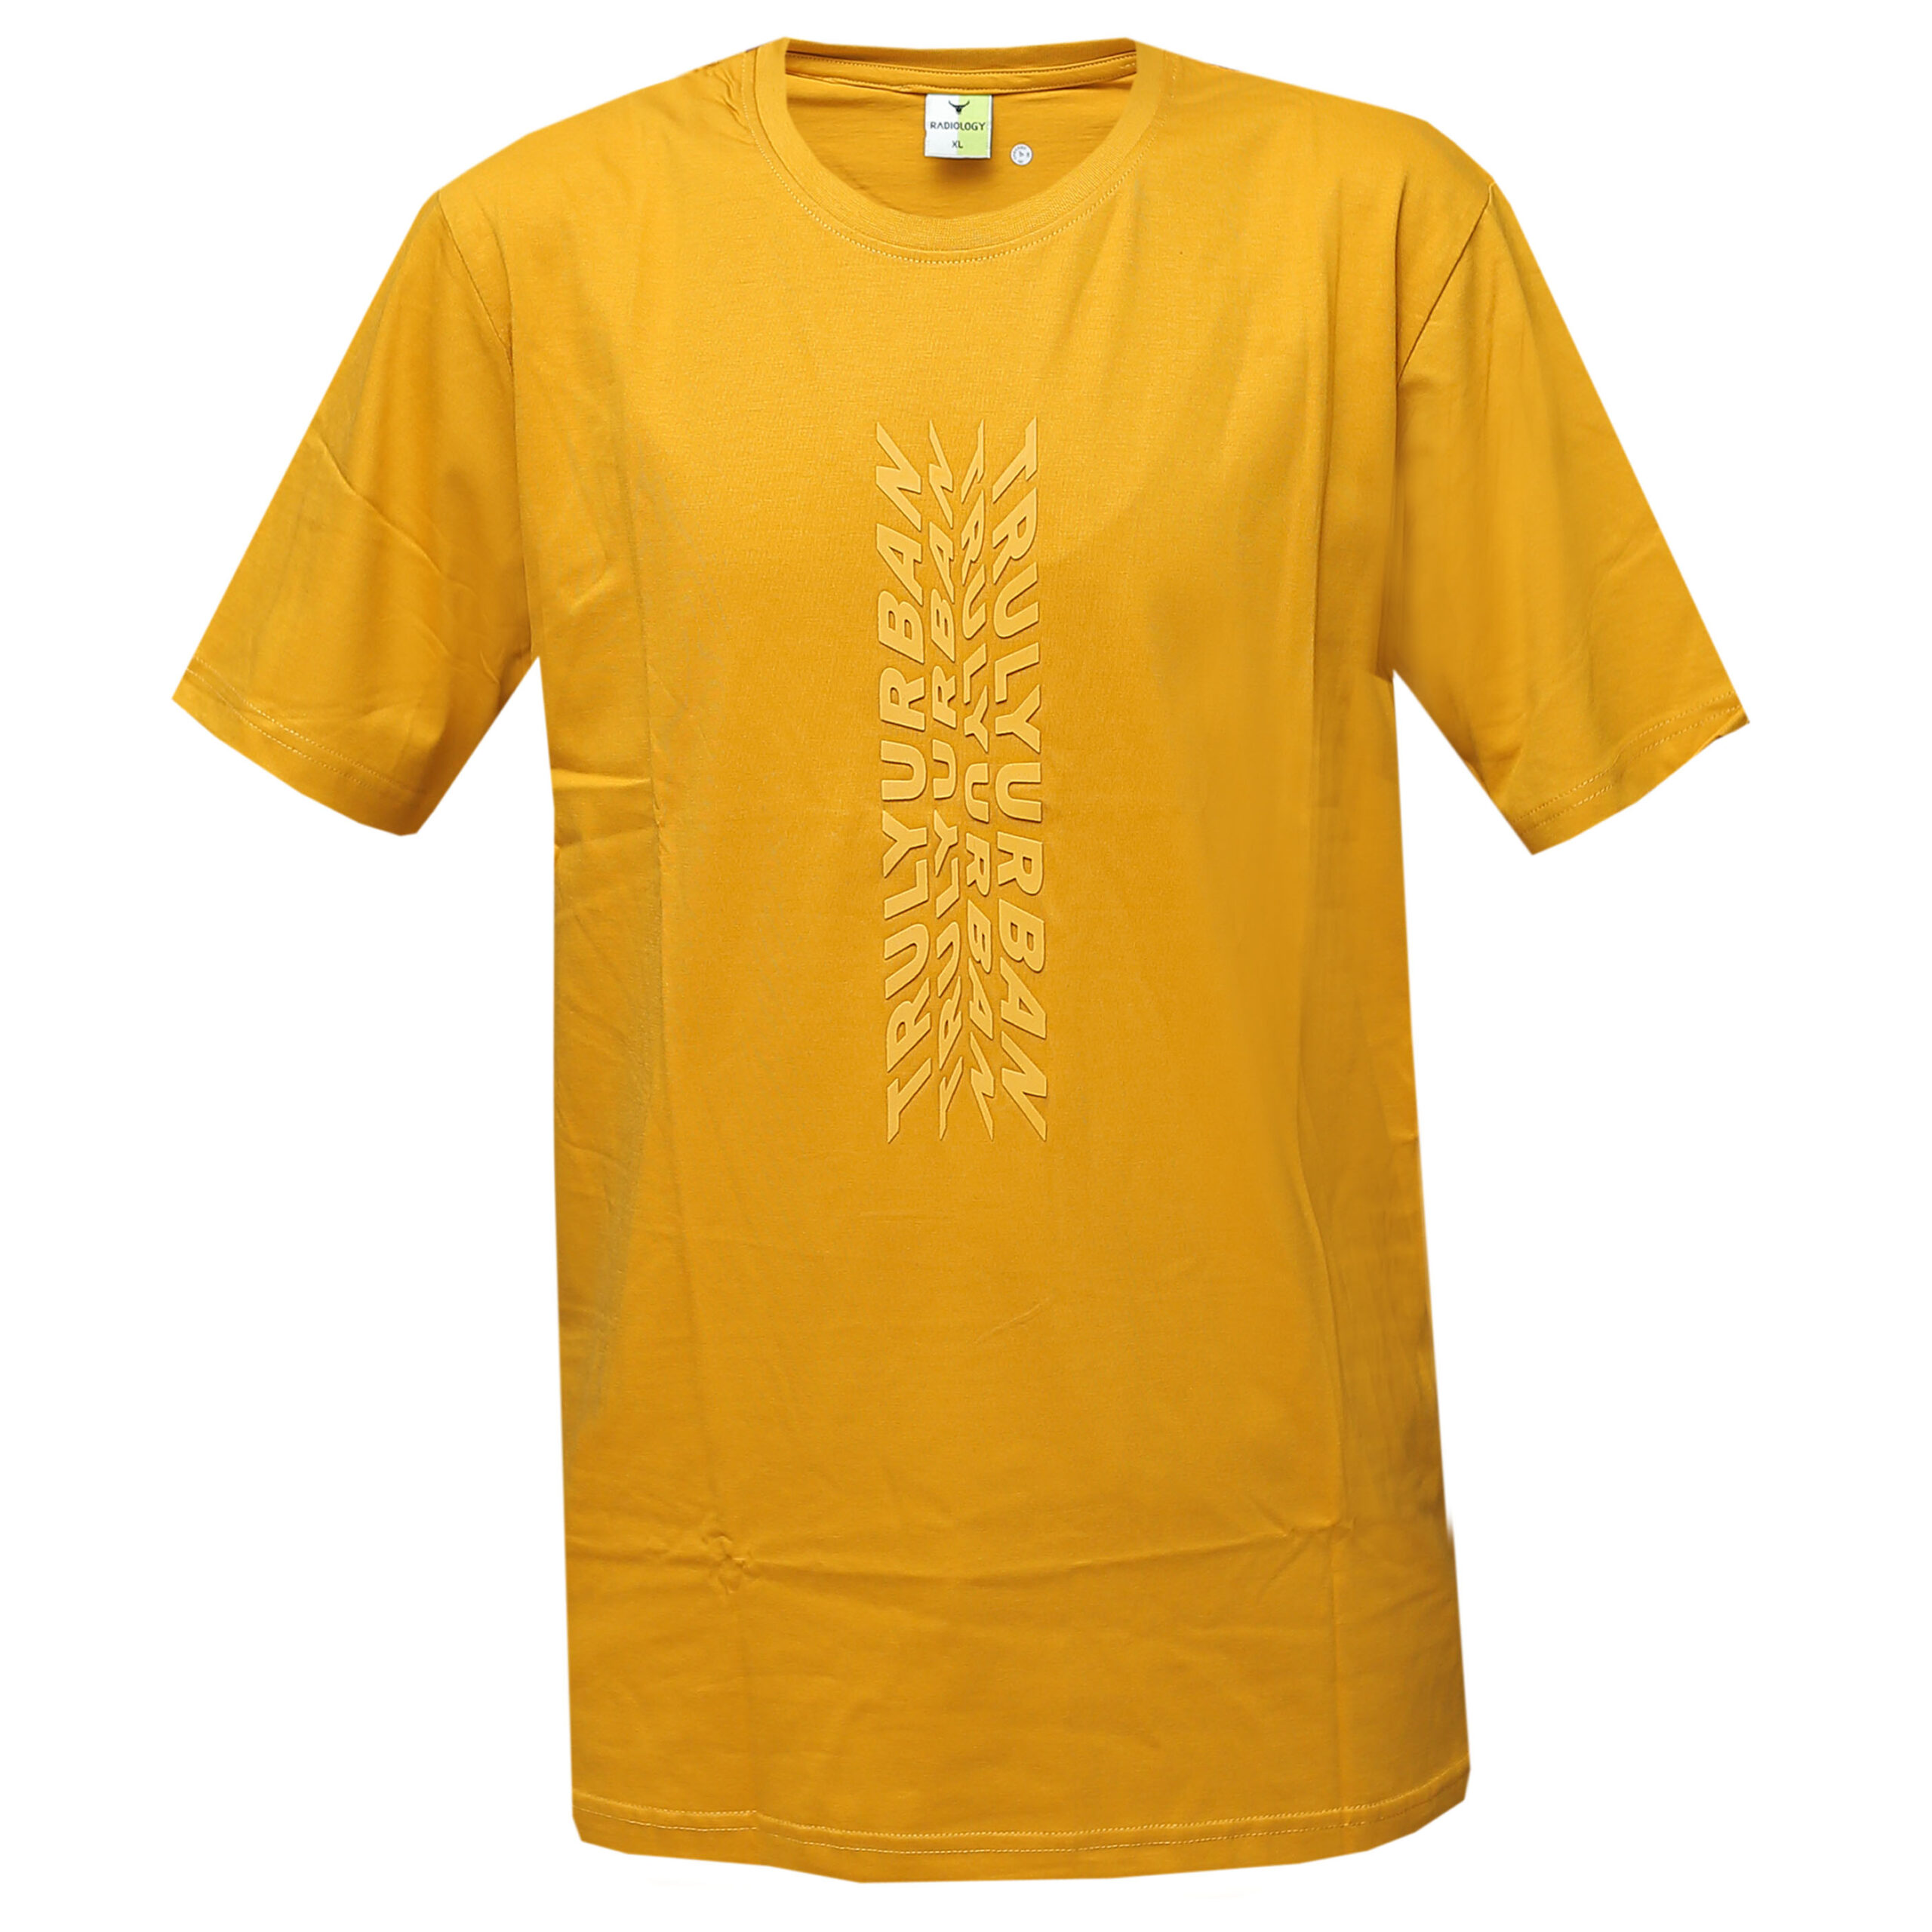 Printed T-Shirts for Men